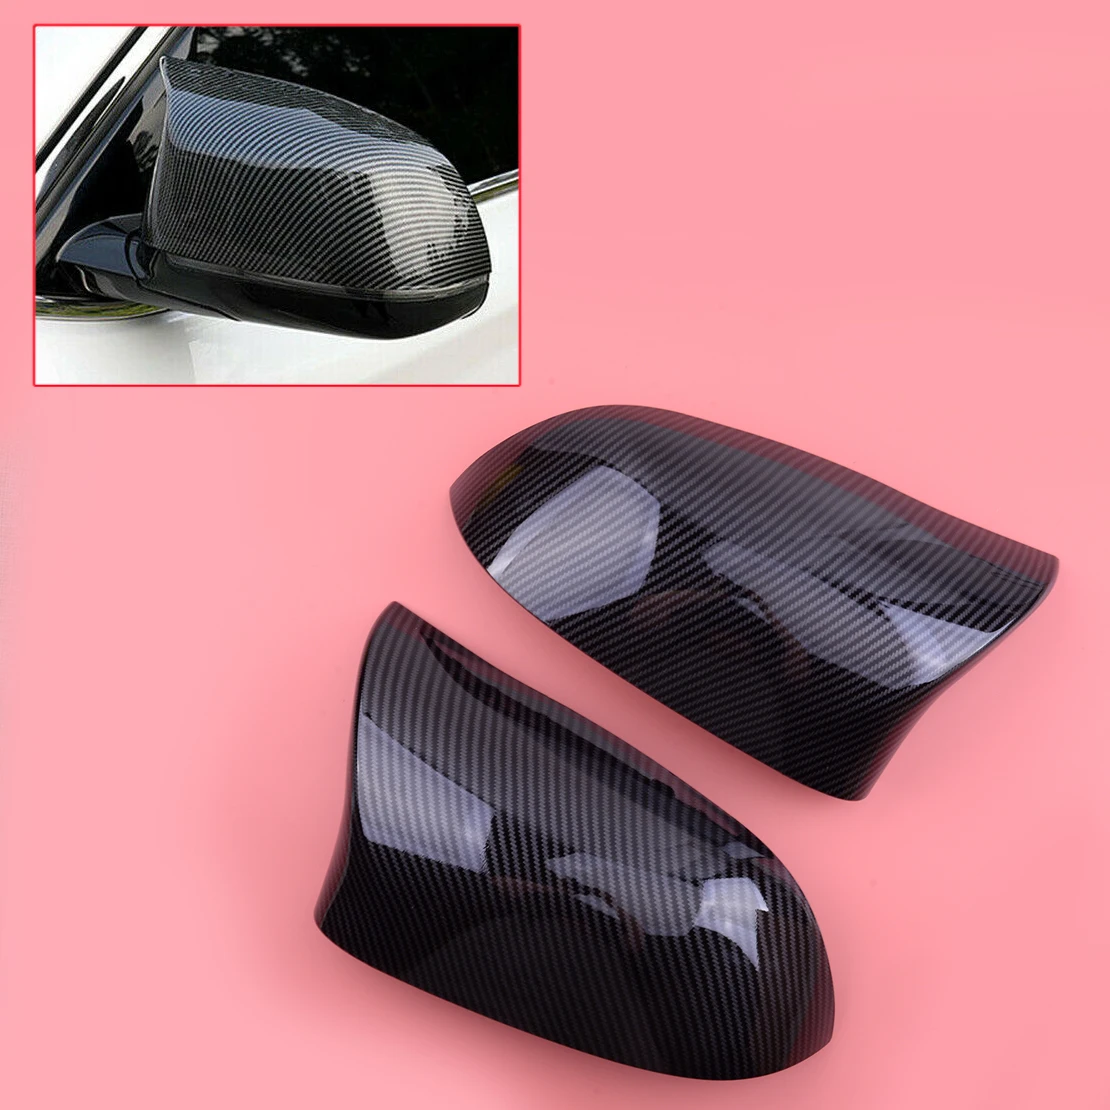 

2Pcs 51167365113 Side Rearview Mirror Cover Cap 51167365114 Fit For BMW X3 X4 X5 X6 F25 F26 F15 F16 2015-2017 Carbon Fiber Style